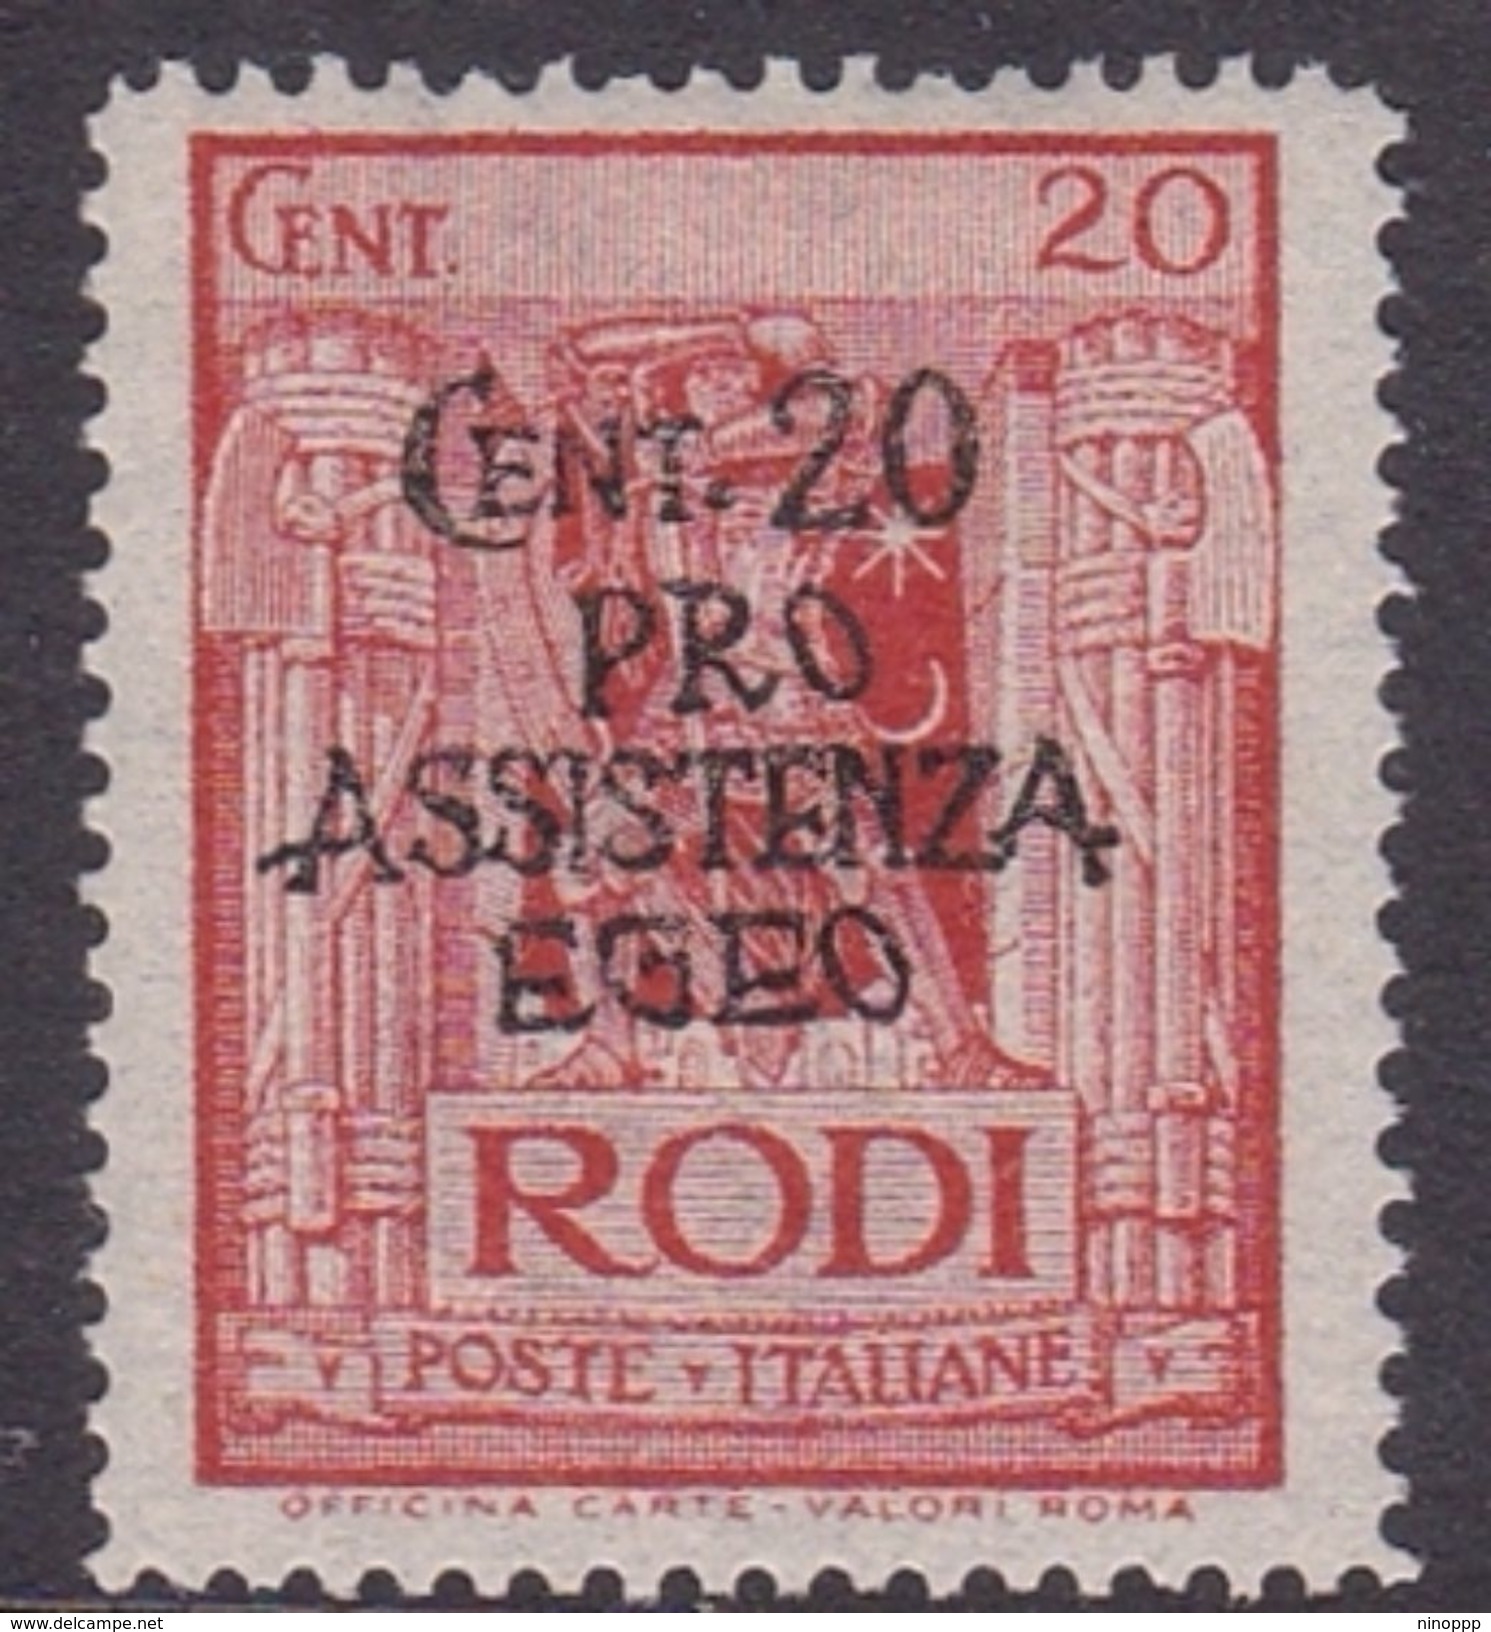 Italy-Colonies And Territories-Aegean General Issue-Rodi S120 1943 Pro Assistenza Egeo,20c+20c Red MNH - General Issues